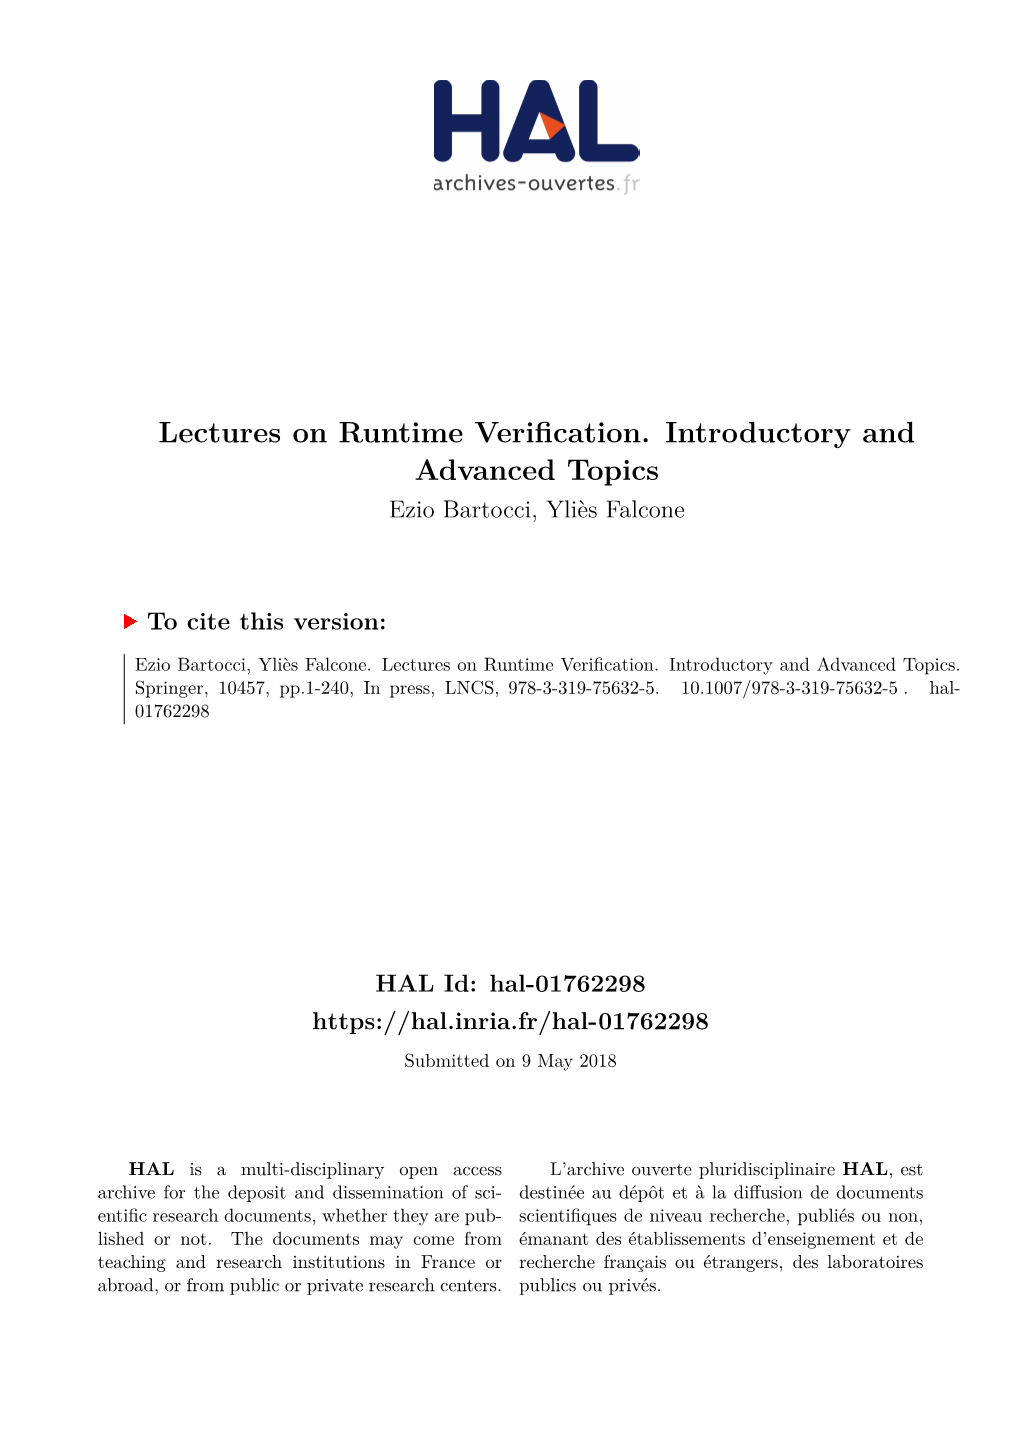 Lectures on Runtime Verification. Introductory and Advanced Topics Ezio Bartocci, Yliès Falcone